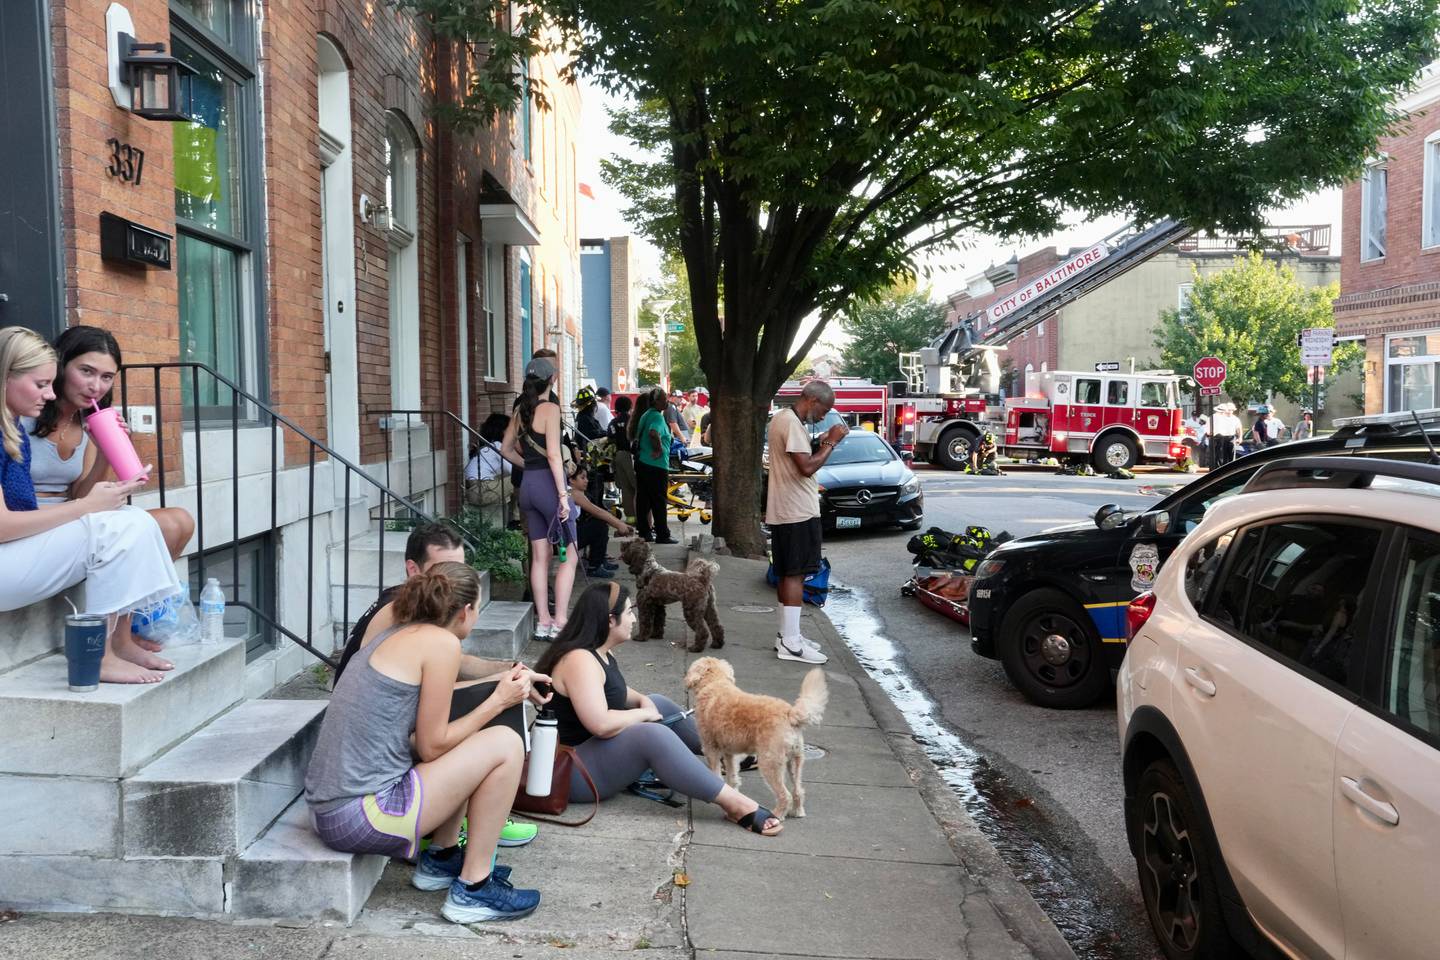 A group of people sit on stoops and the sidewalk as fire truck are seen in the background.